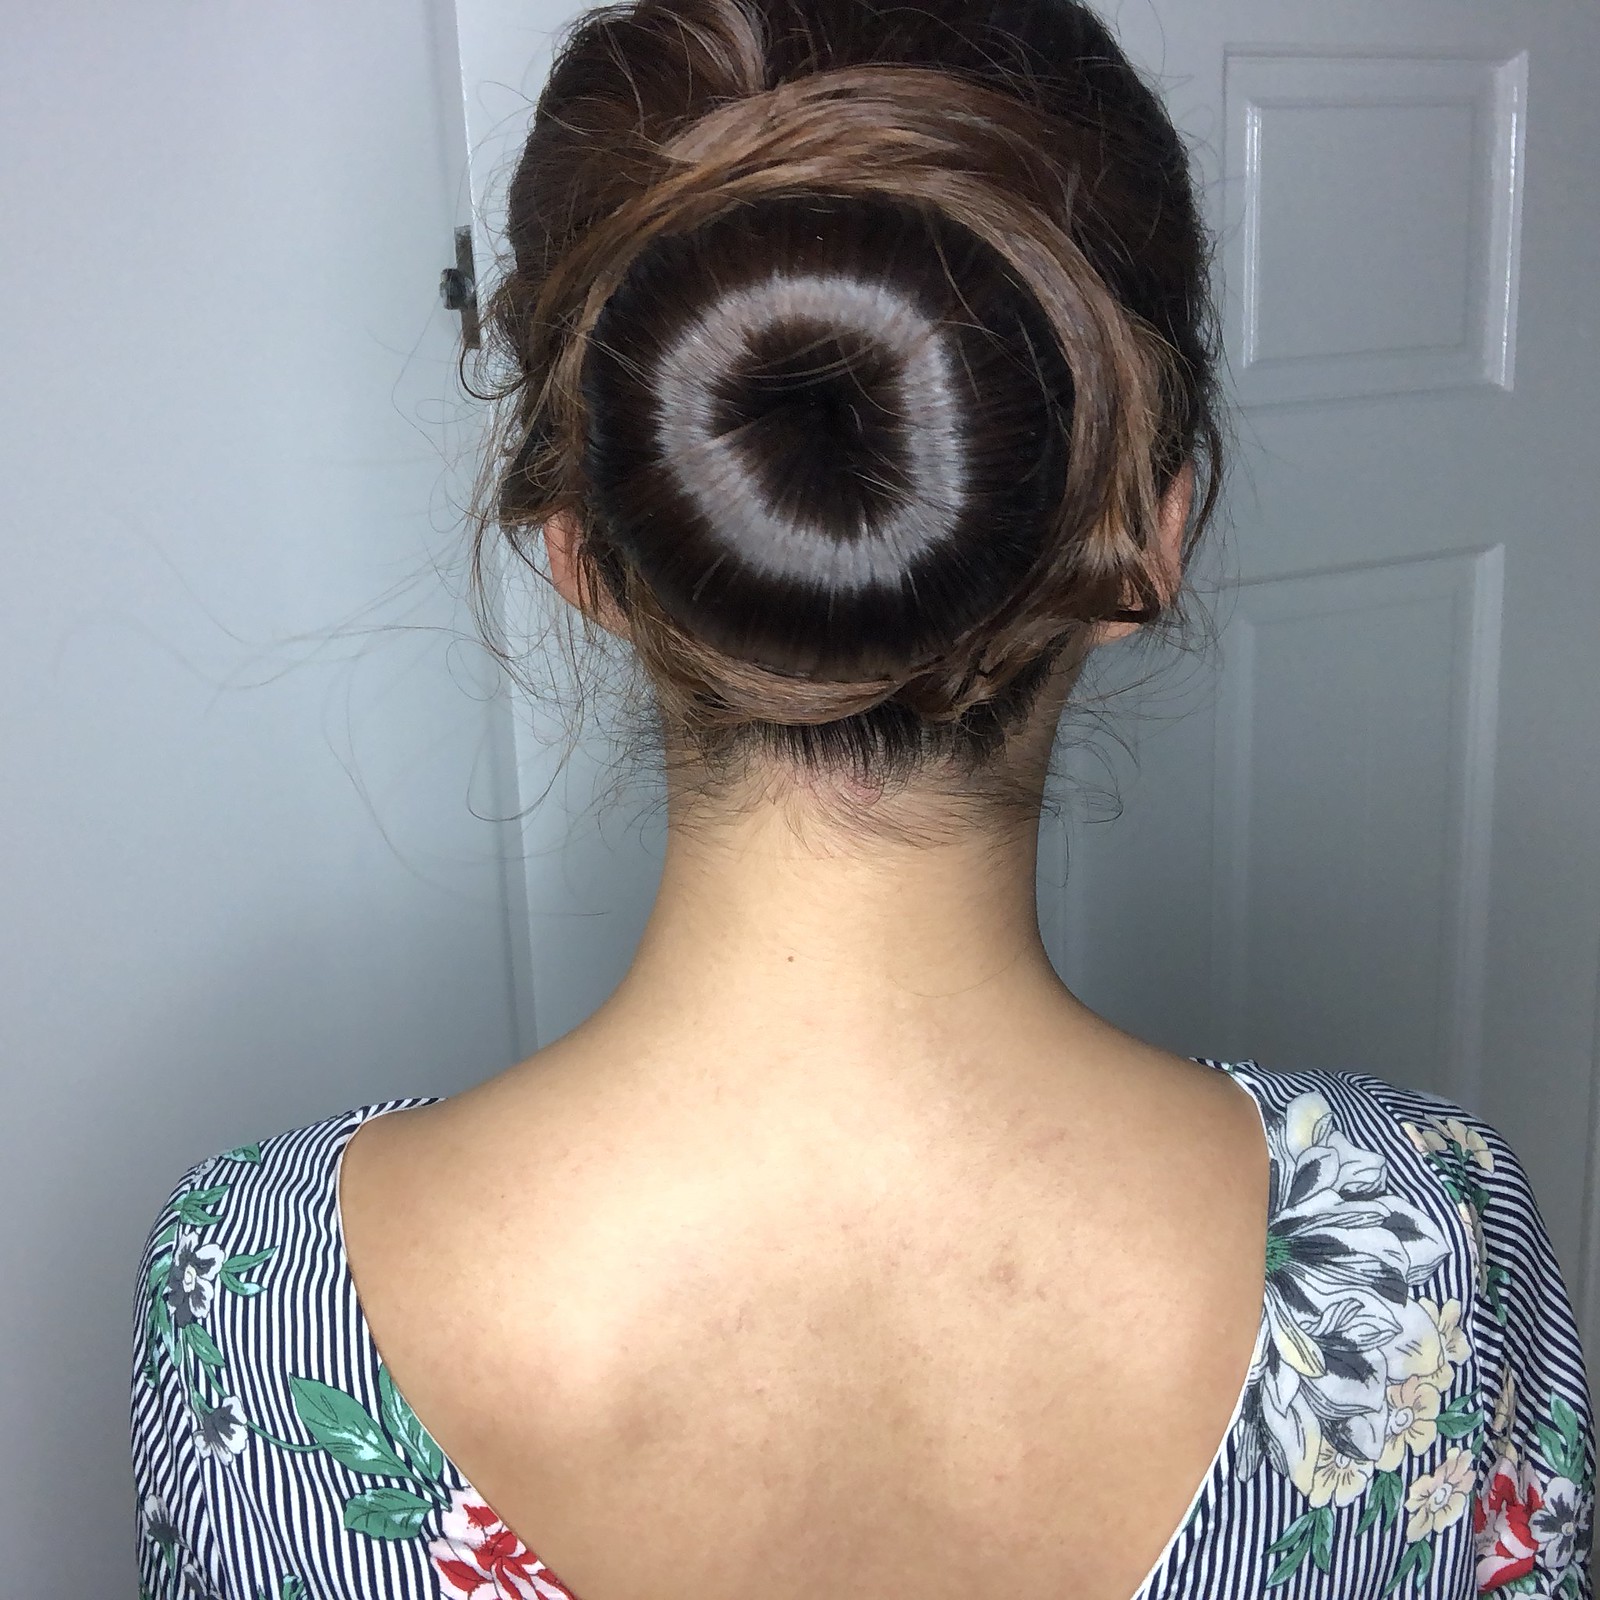 All that hair spray just to achieve this huge bun, my hair was terribly abused. 